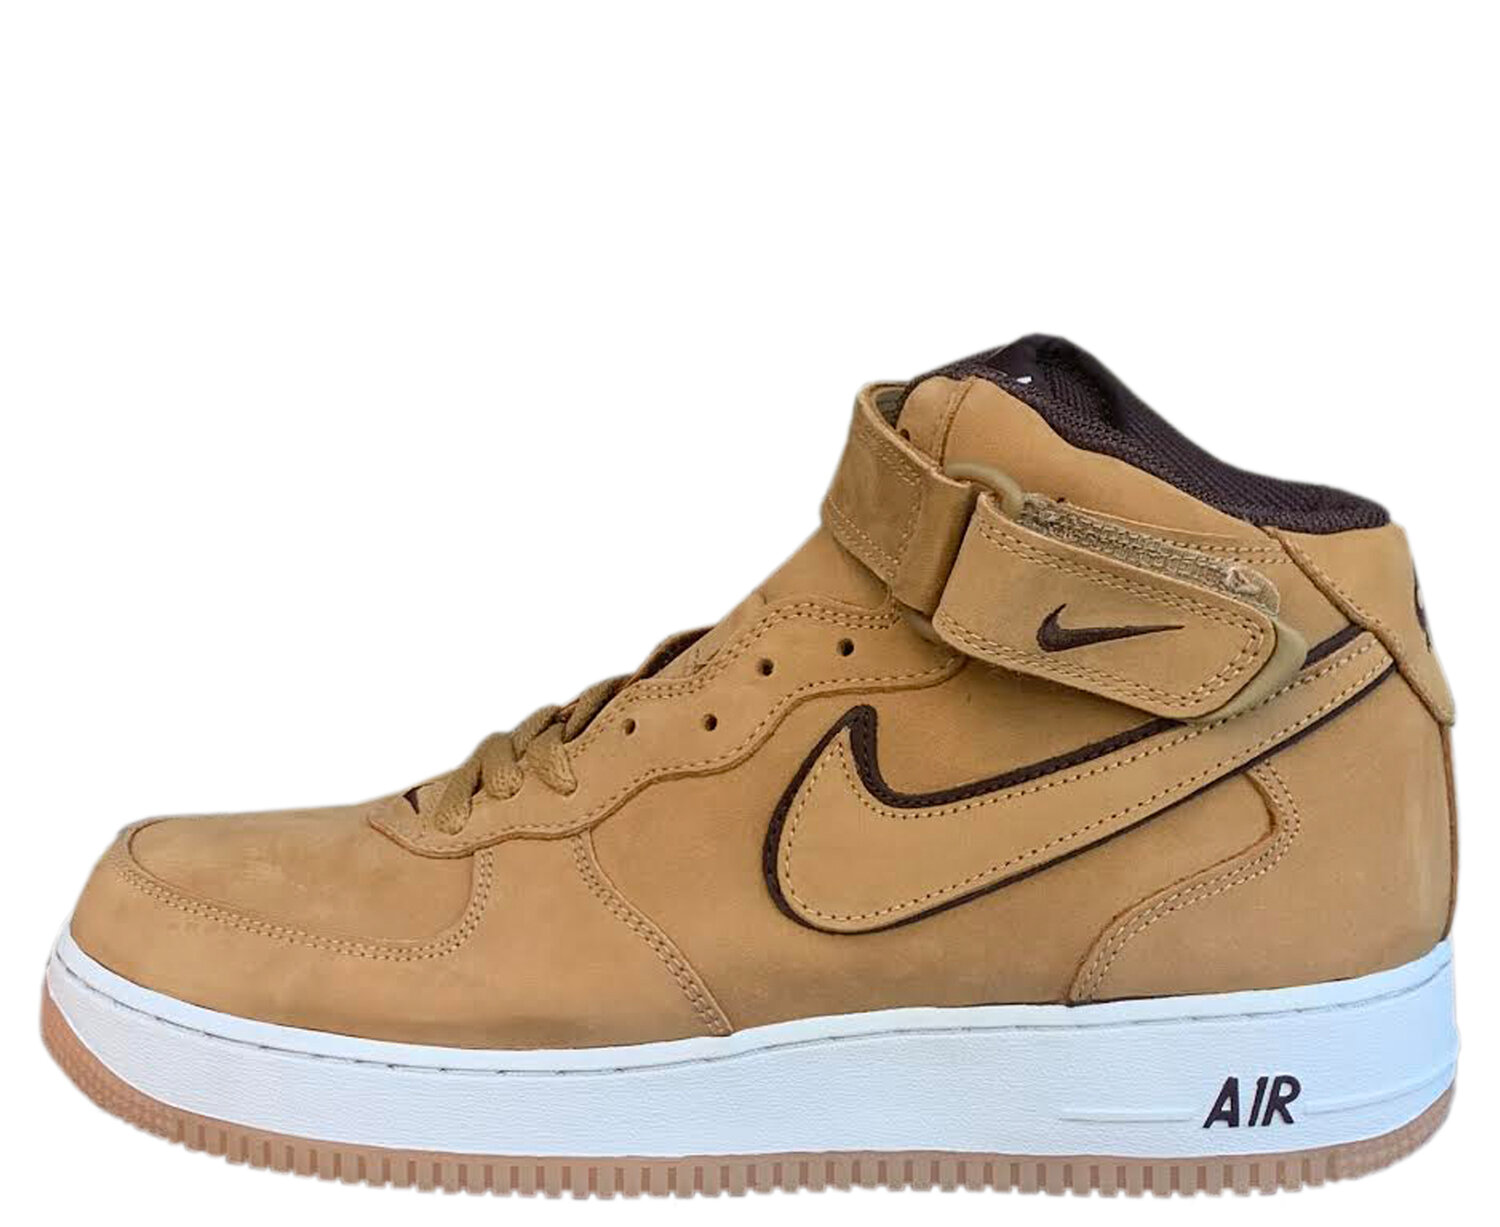 Nike Air 1 "Waterproof" Wheat / Baroque (Size 10.5) DS — Roots